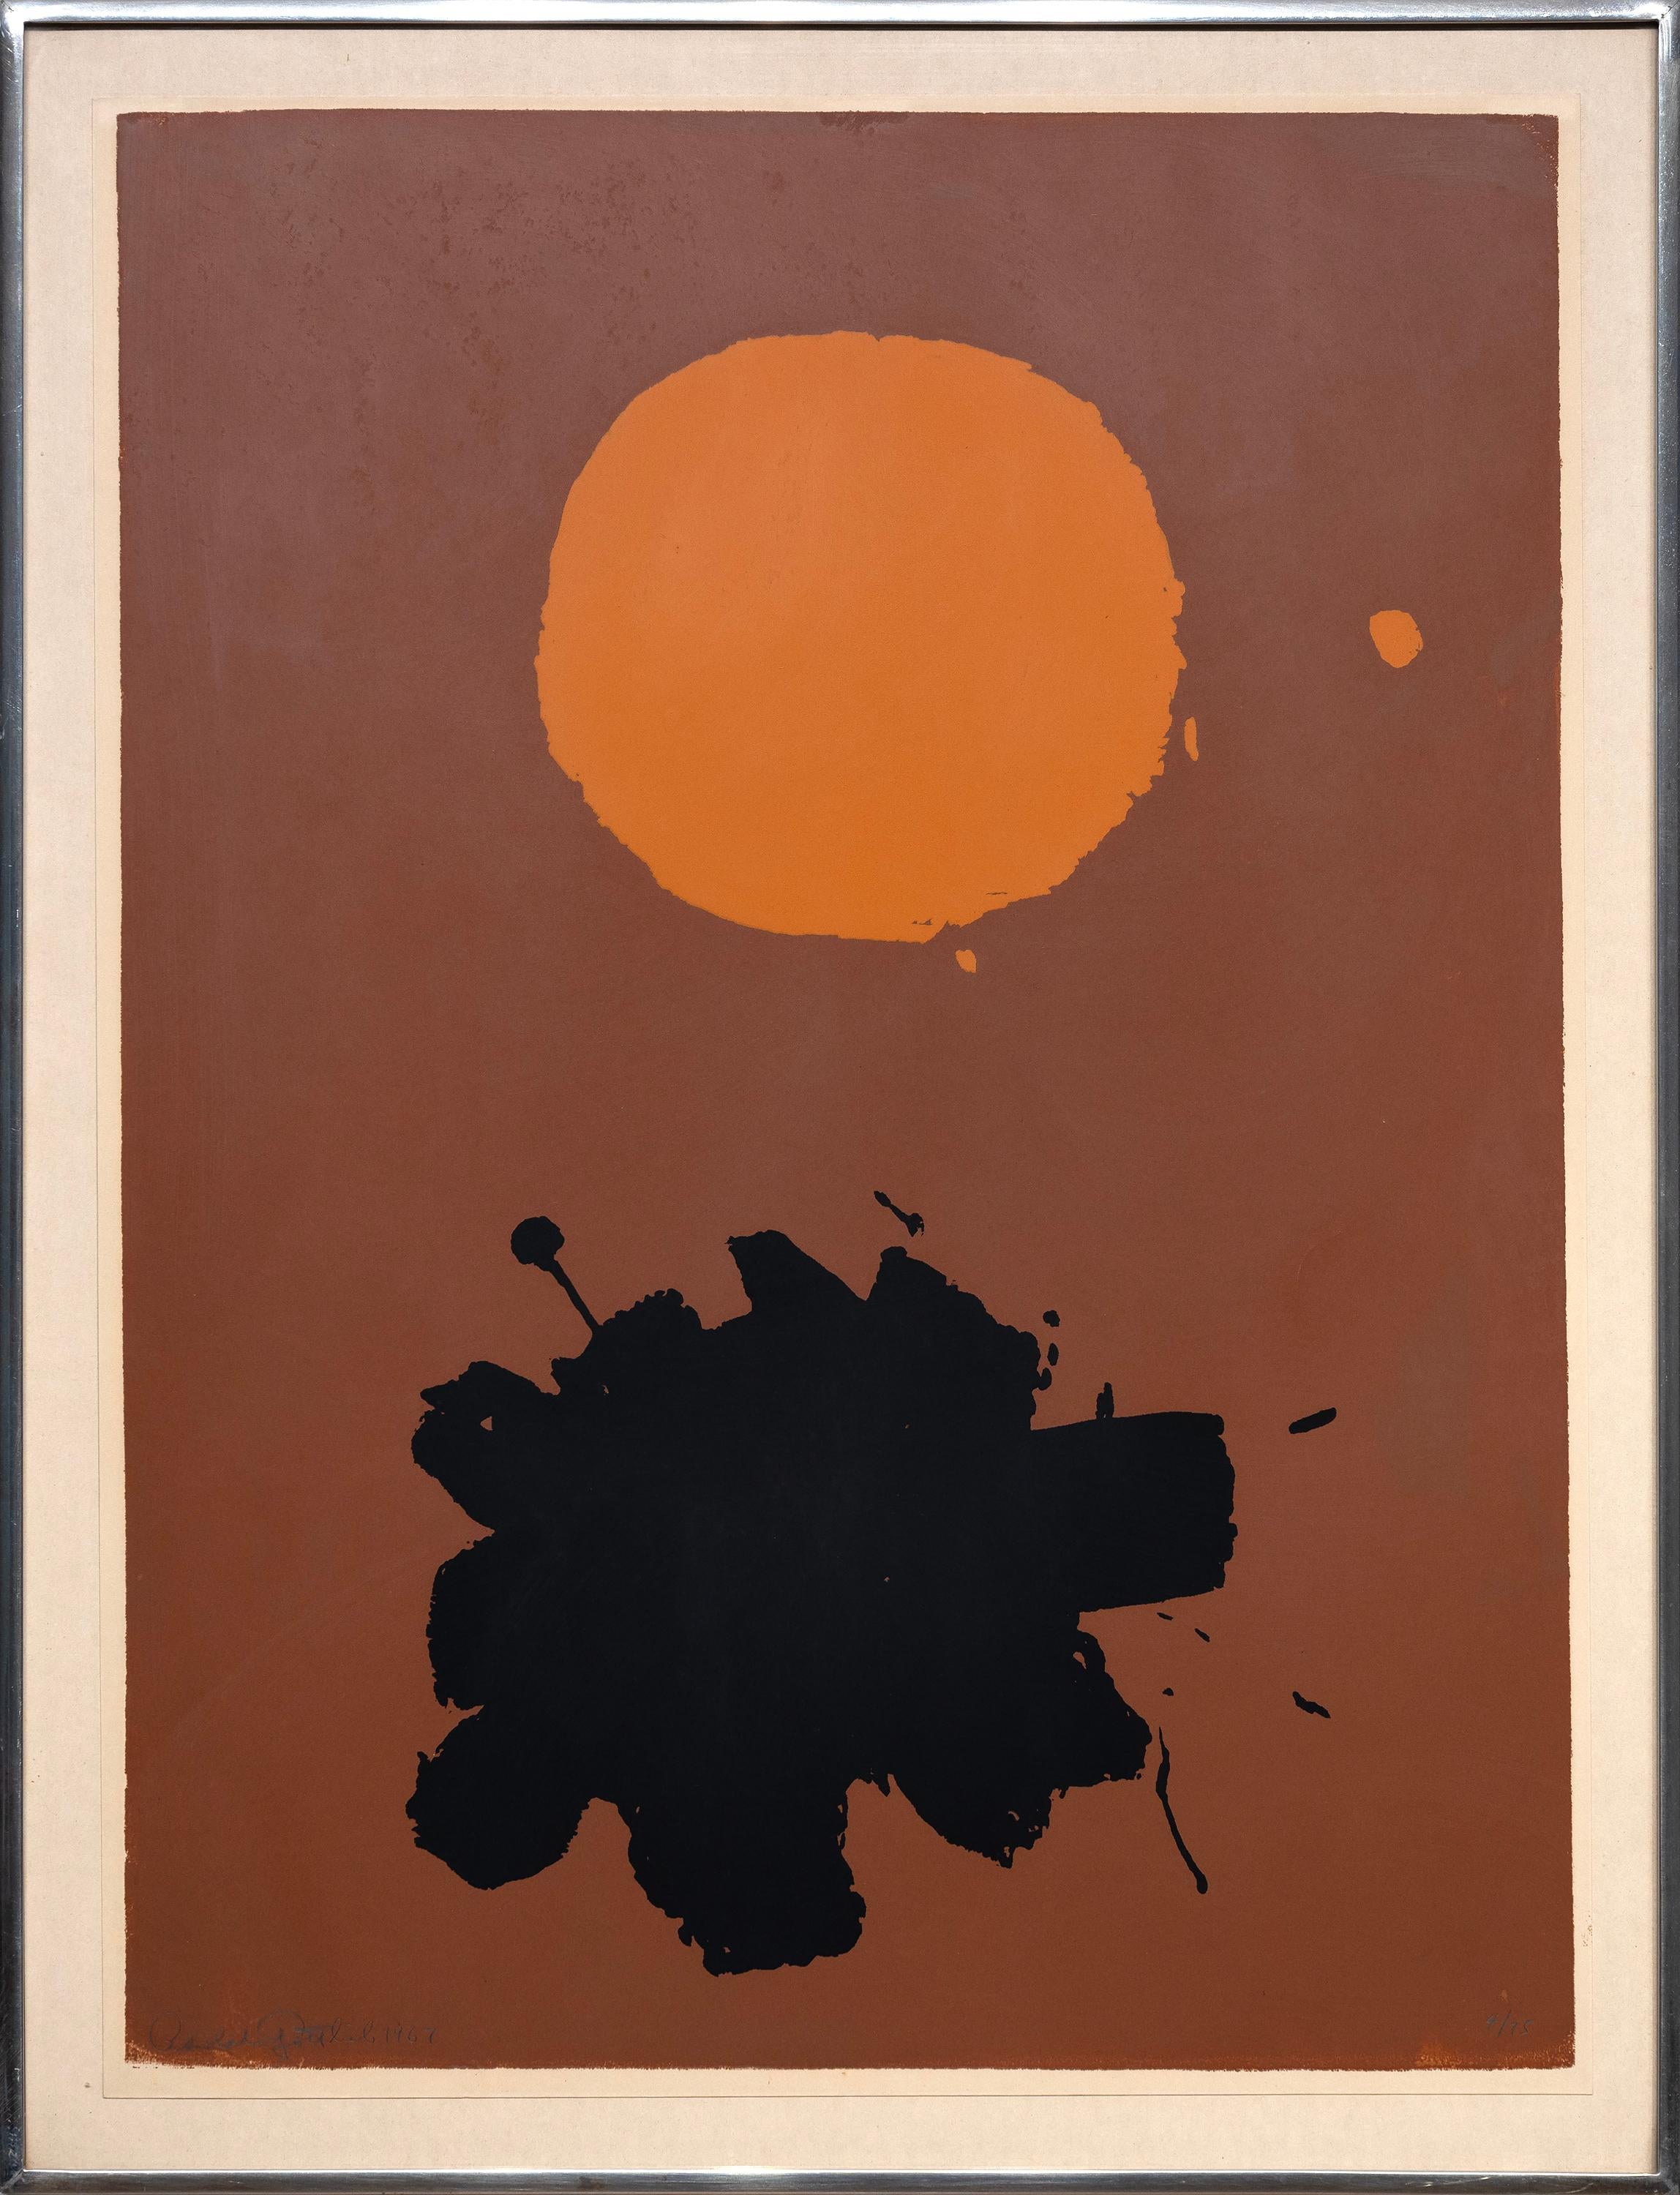 Expanding - Print by Adolph Gottlieb